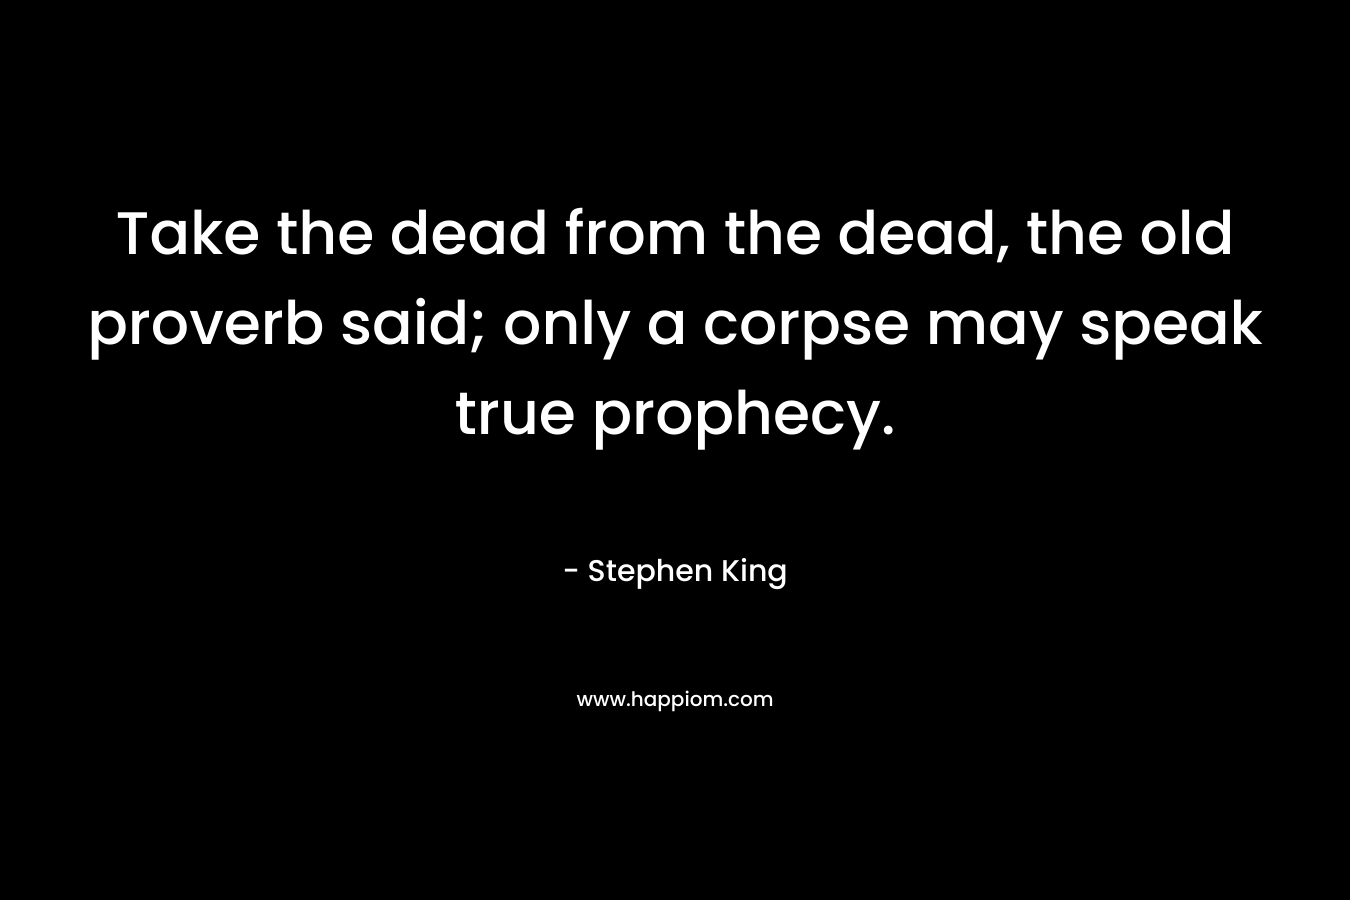 Take the dead from the dead, the old proverb said; only a corpse may speak true prophecy. – Stephen King